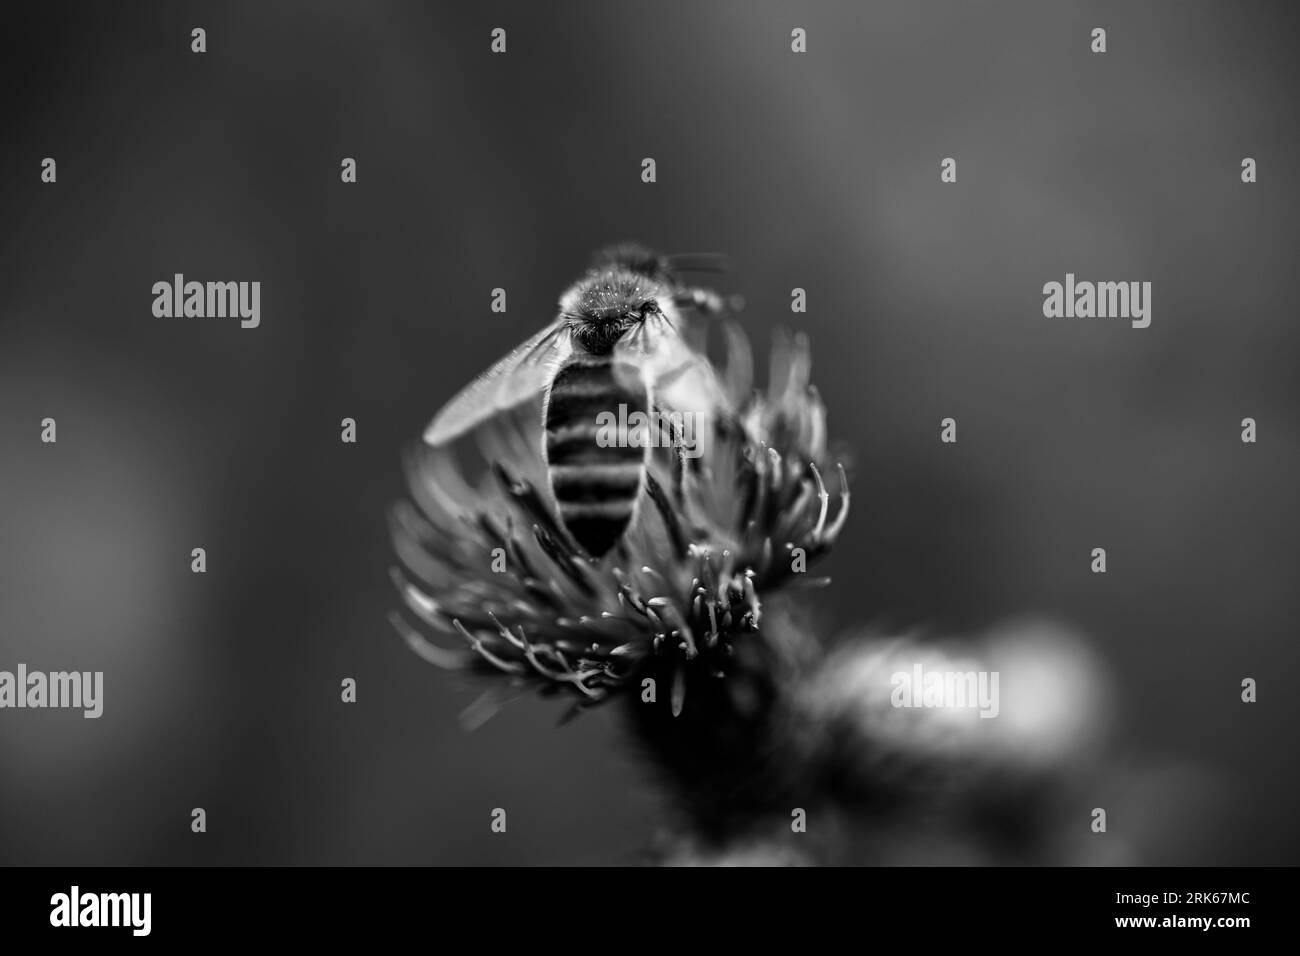 A close-up black and white image of a bee taking off from the stem of a flower Stock Photo